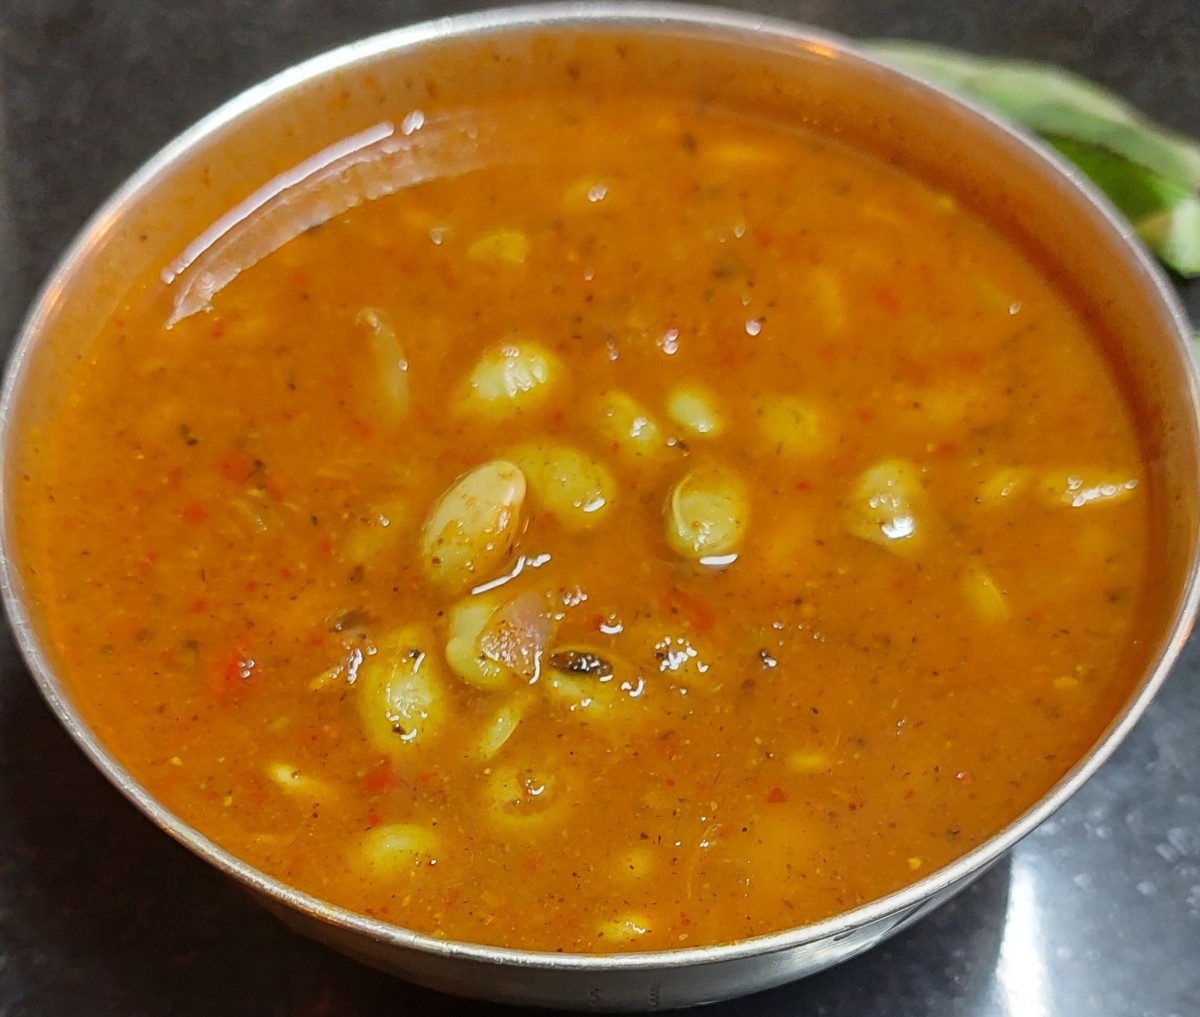 Spicy and tasty hyacinth beans curry is ready to serve. Serve hot with chapati, paratha, phulka, roti or poori.